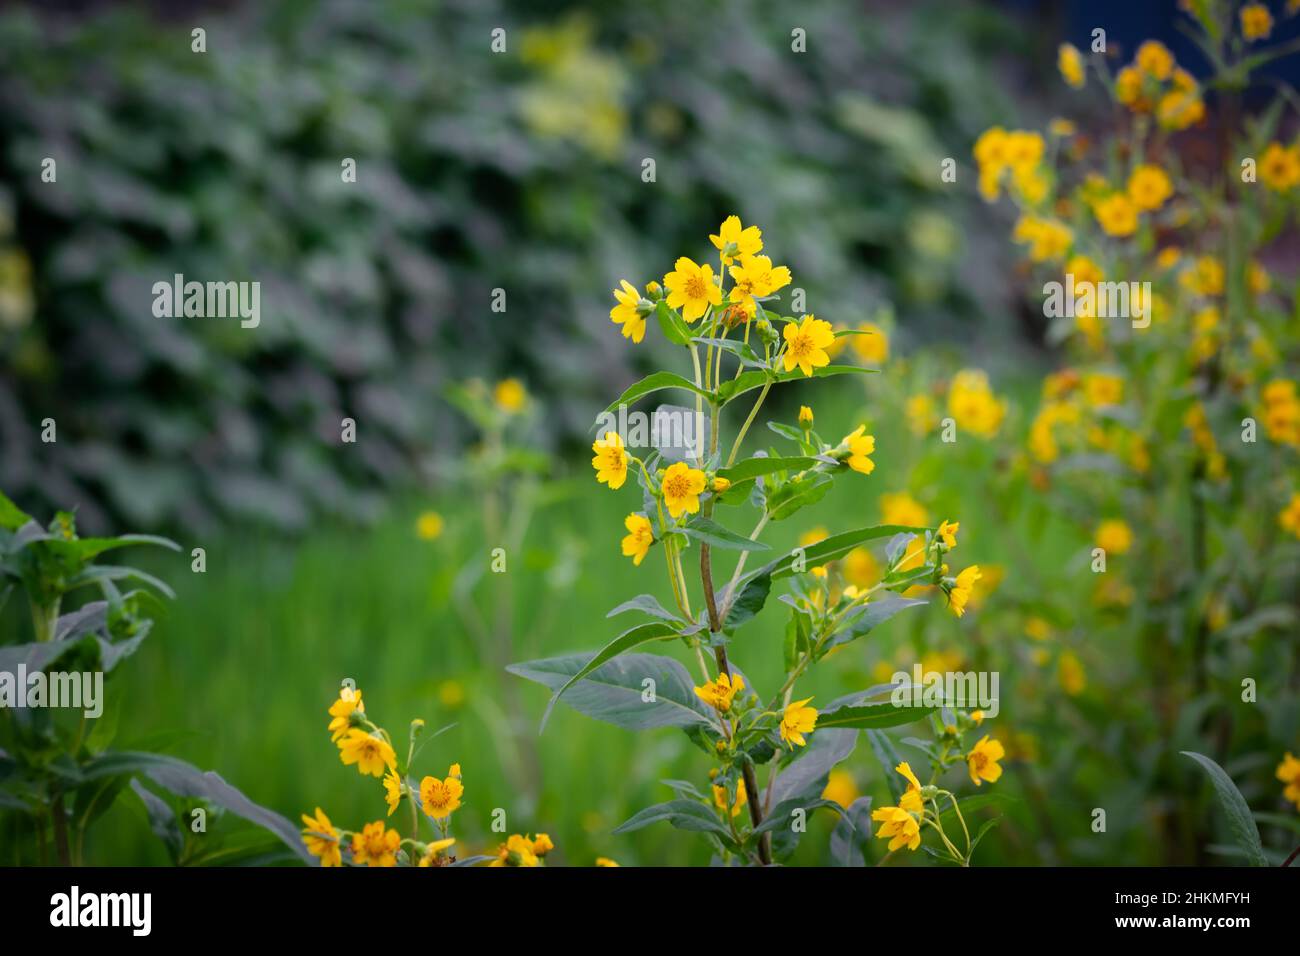 Niger seed flowers fully bloomed. Niger plant is grown for its edible oil and seed. Stock Photo